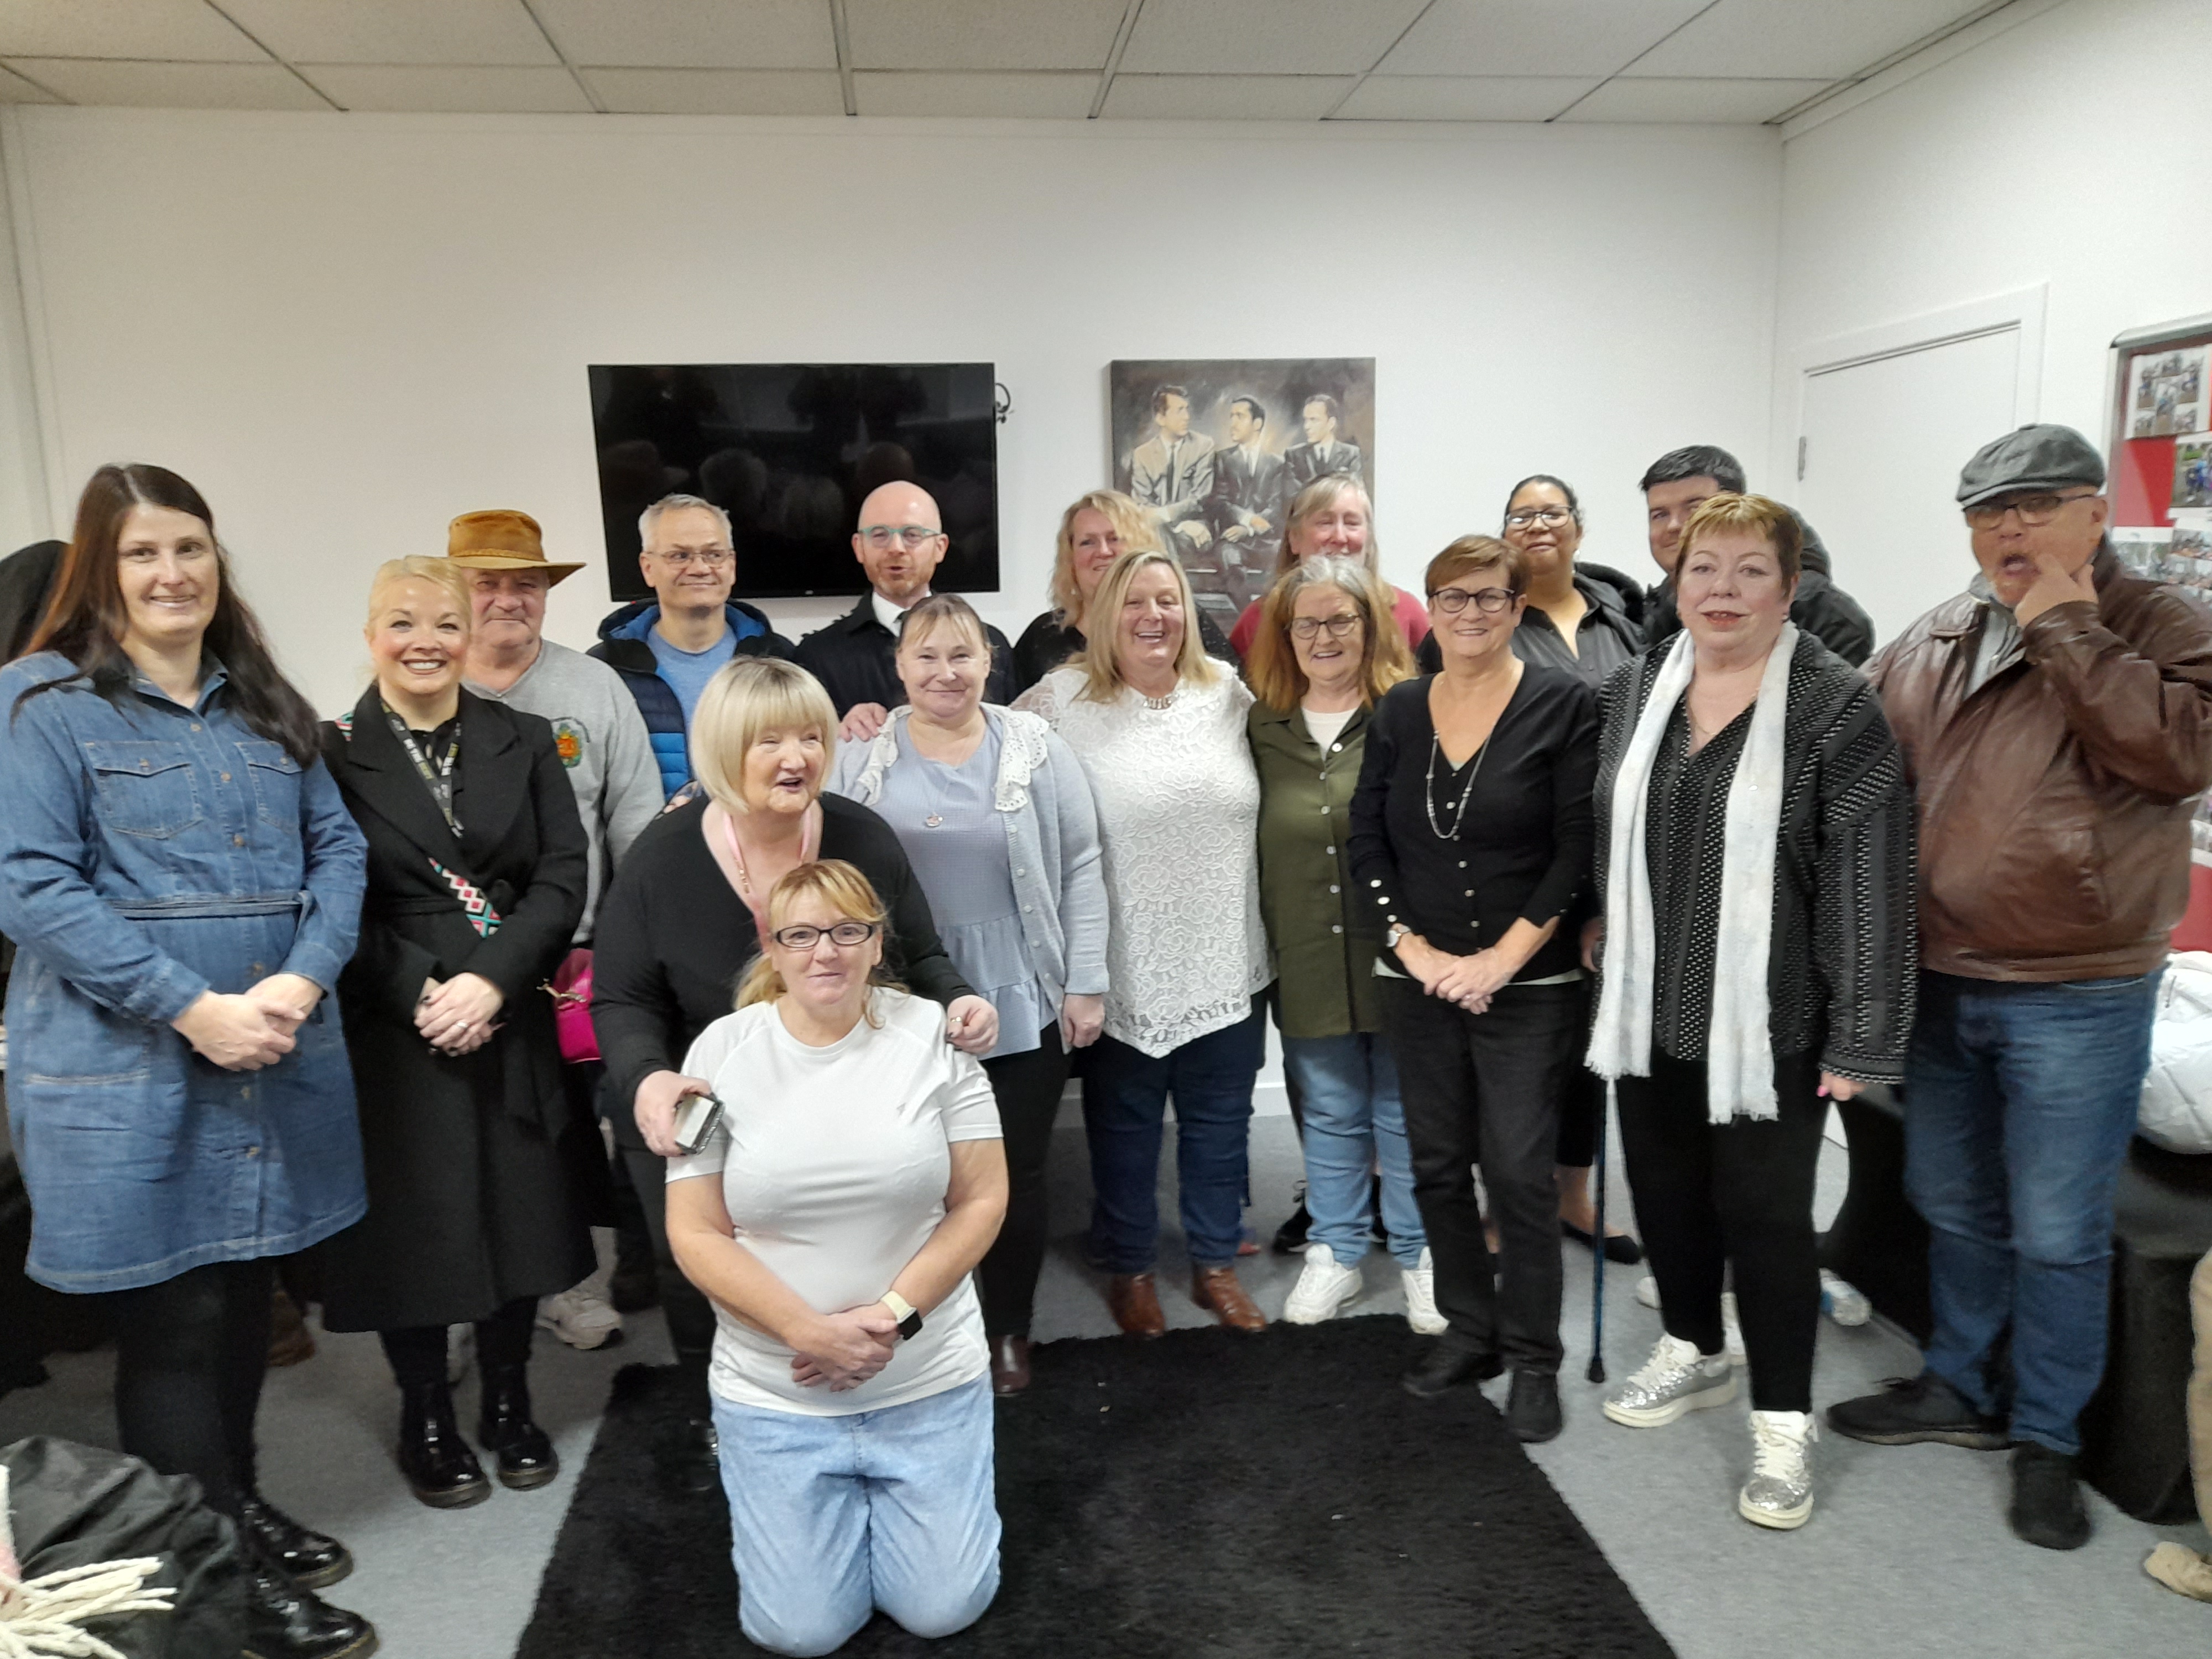 West Dunbartonshire Kinship Carers celebrated the opening of their new community support centre with a £5000 house warming gift from the Council.